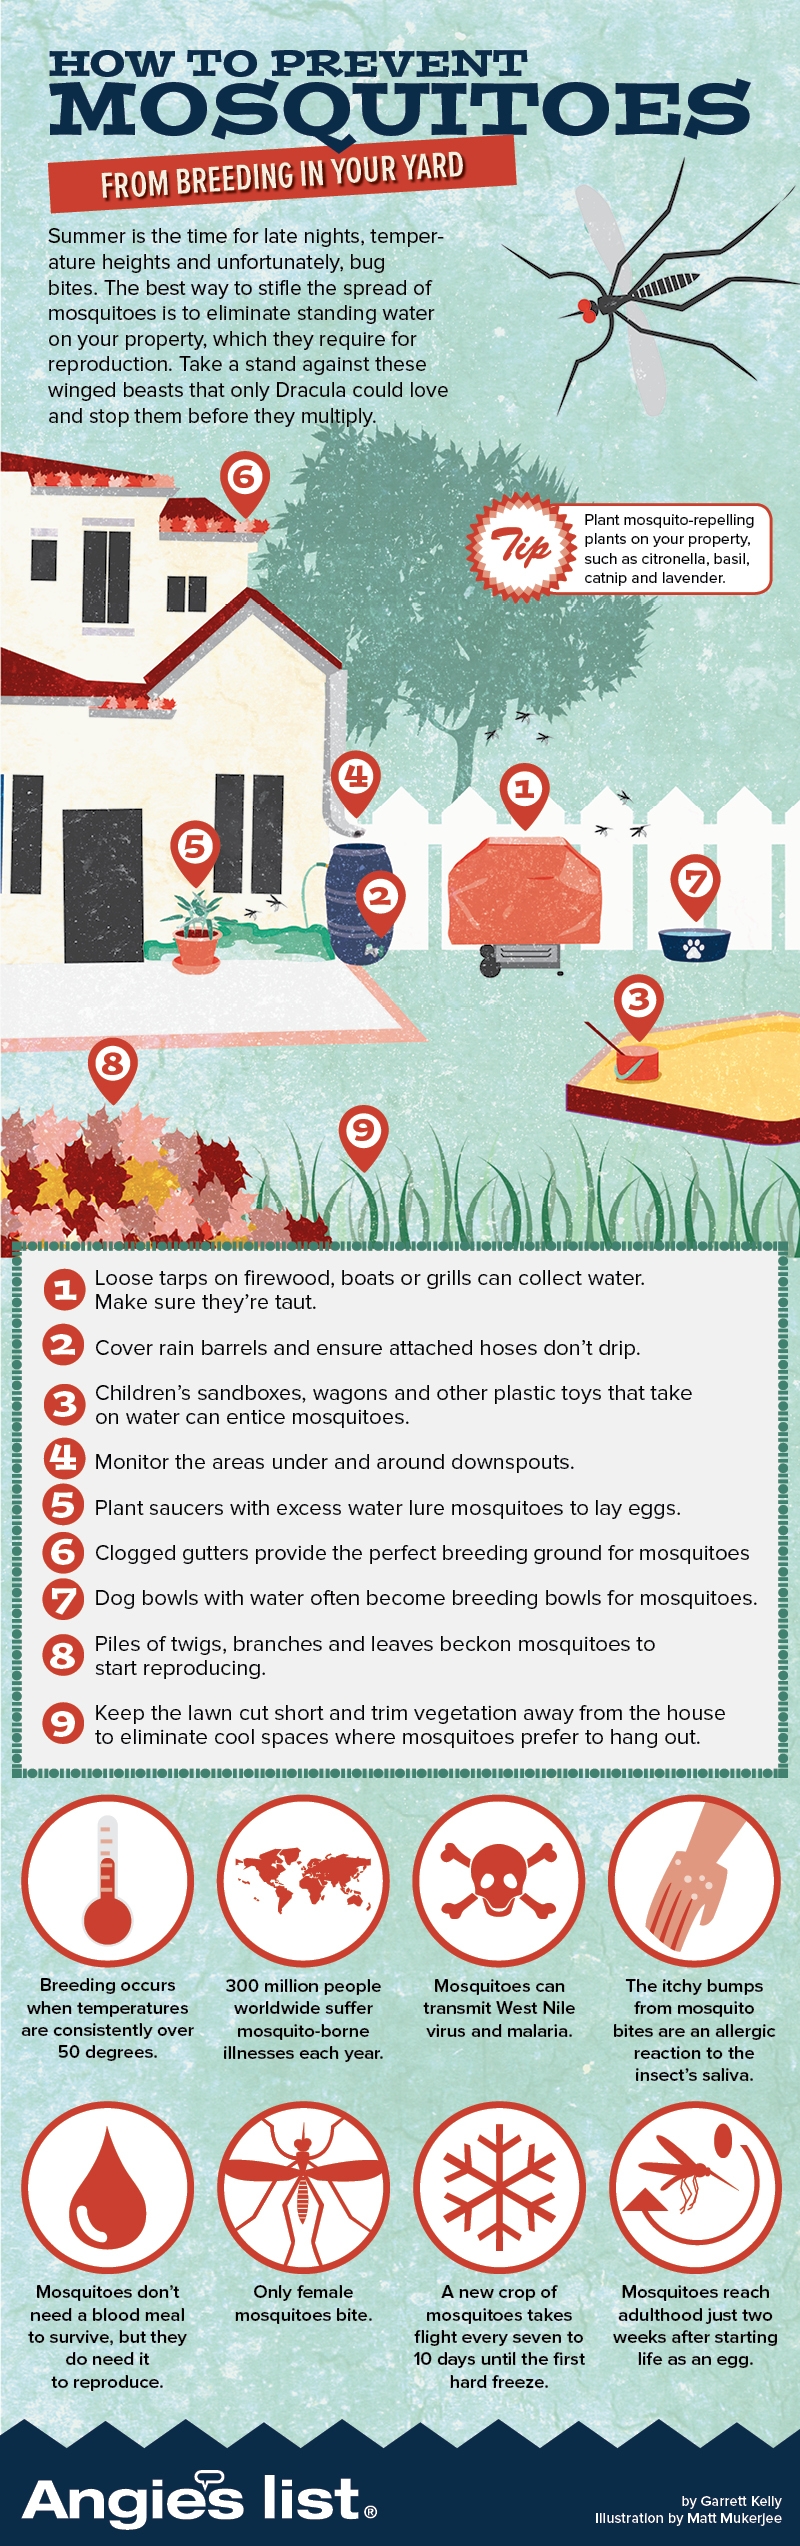 How To Prevent Mosquitoes From Breeding in Your Yard